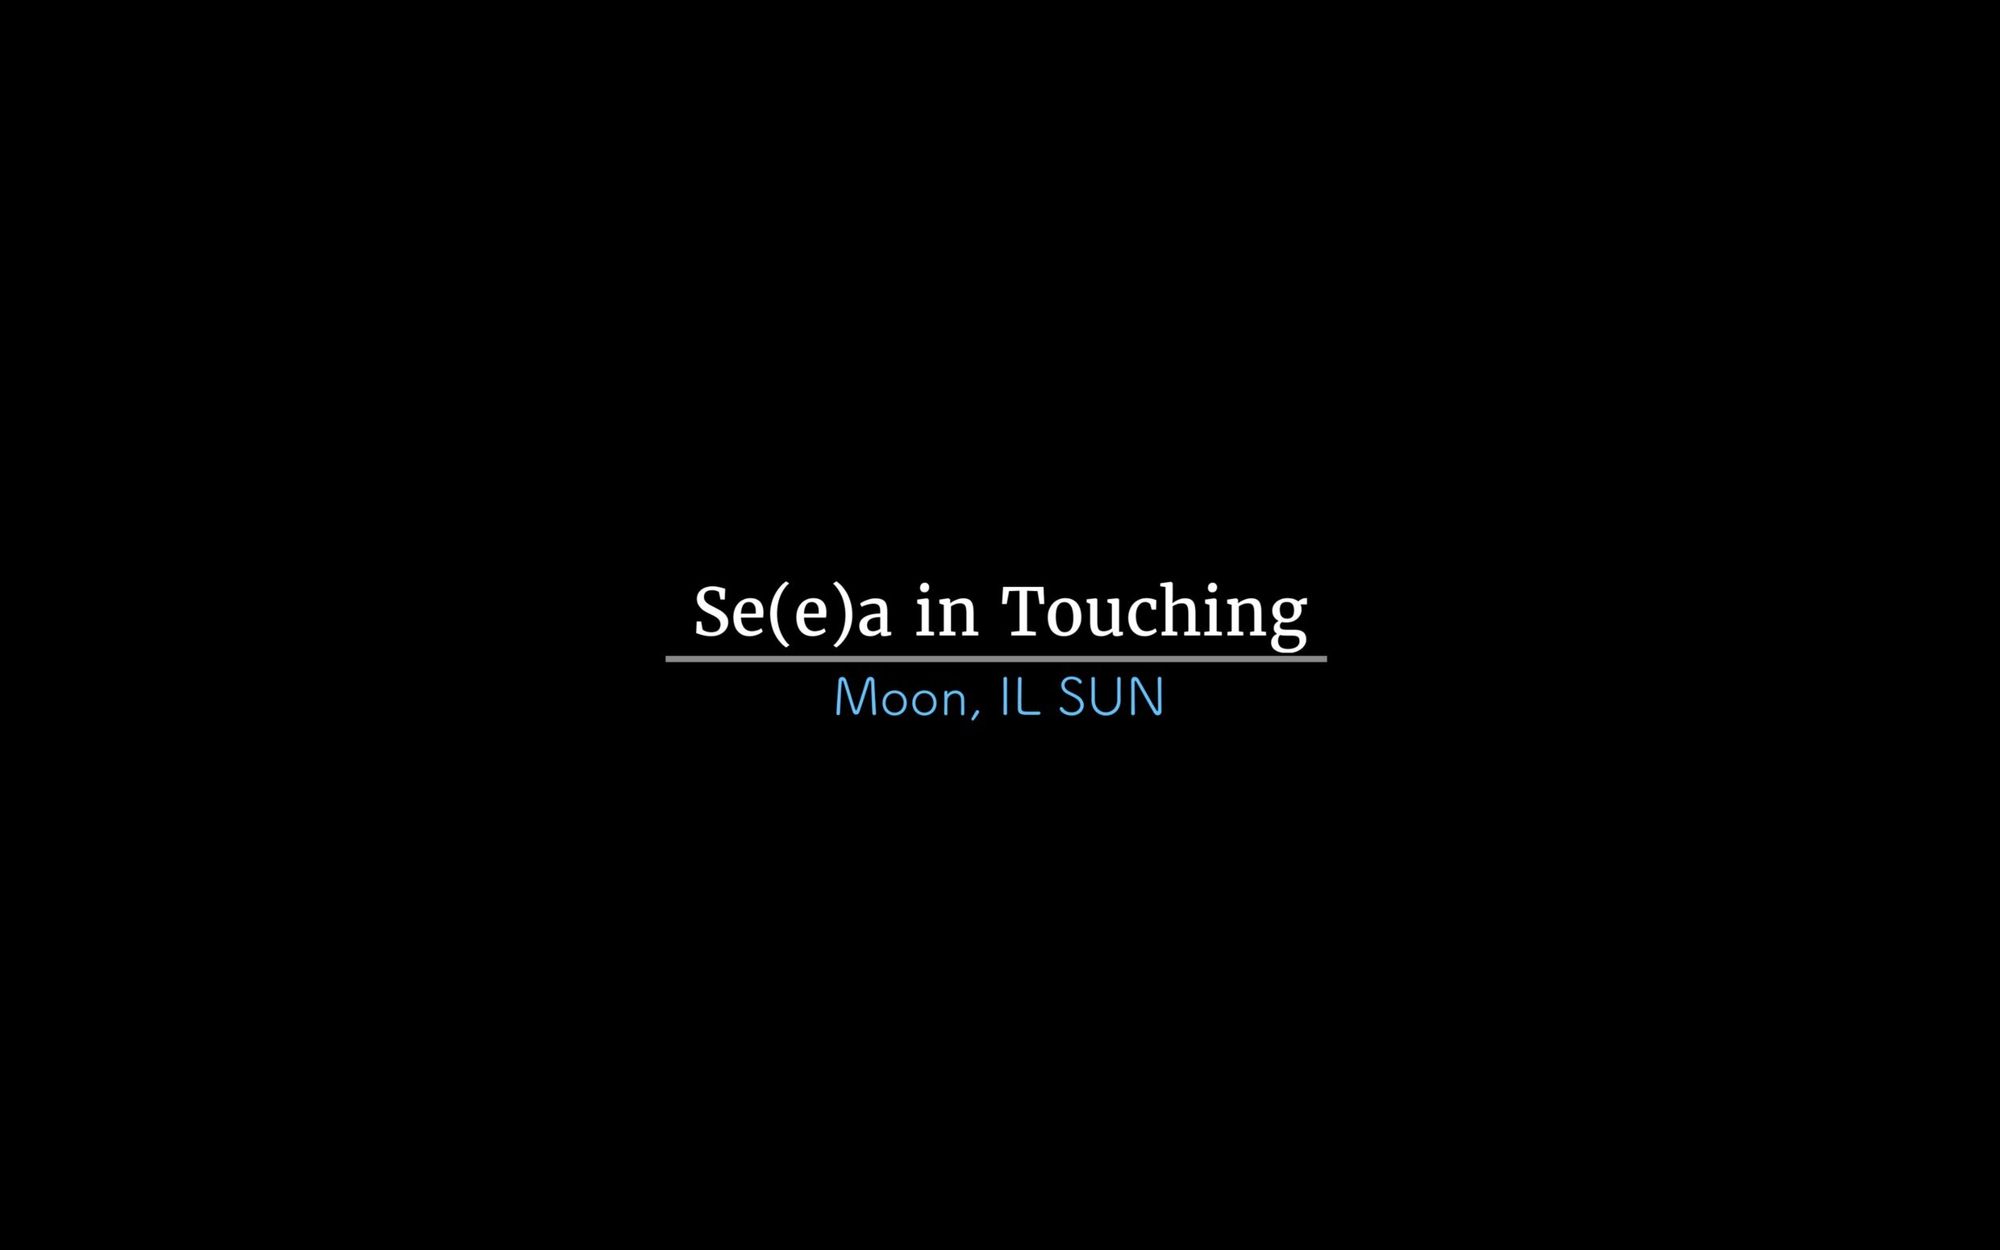 Se(e)a in Touching